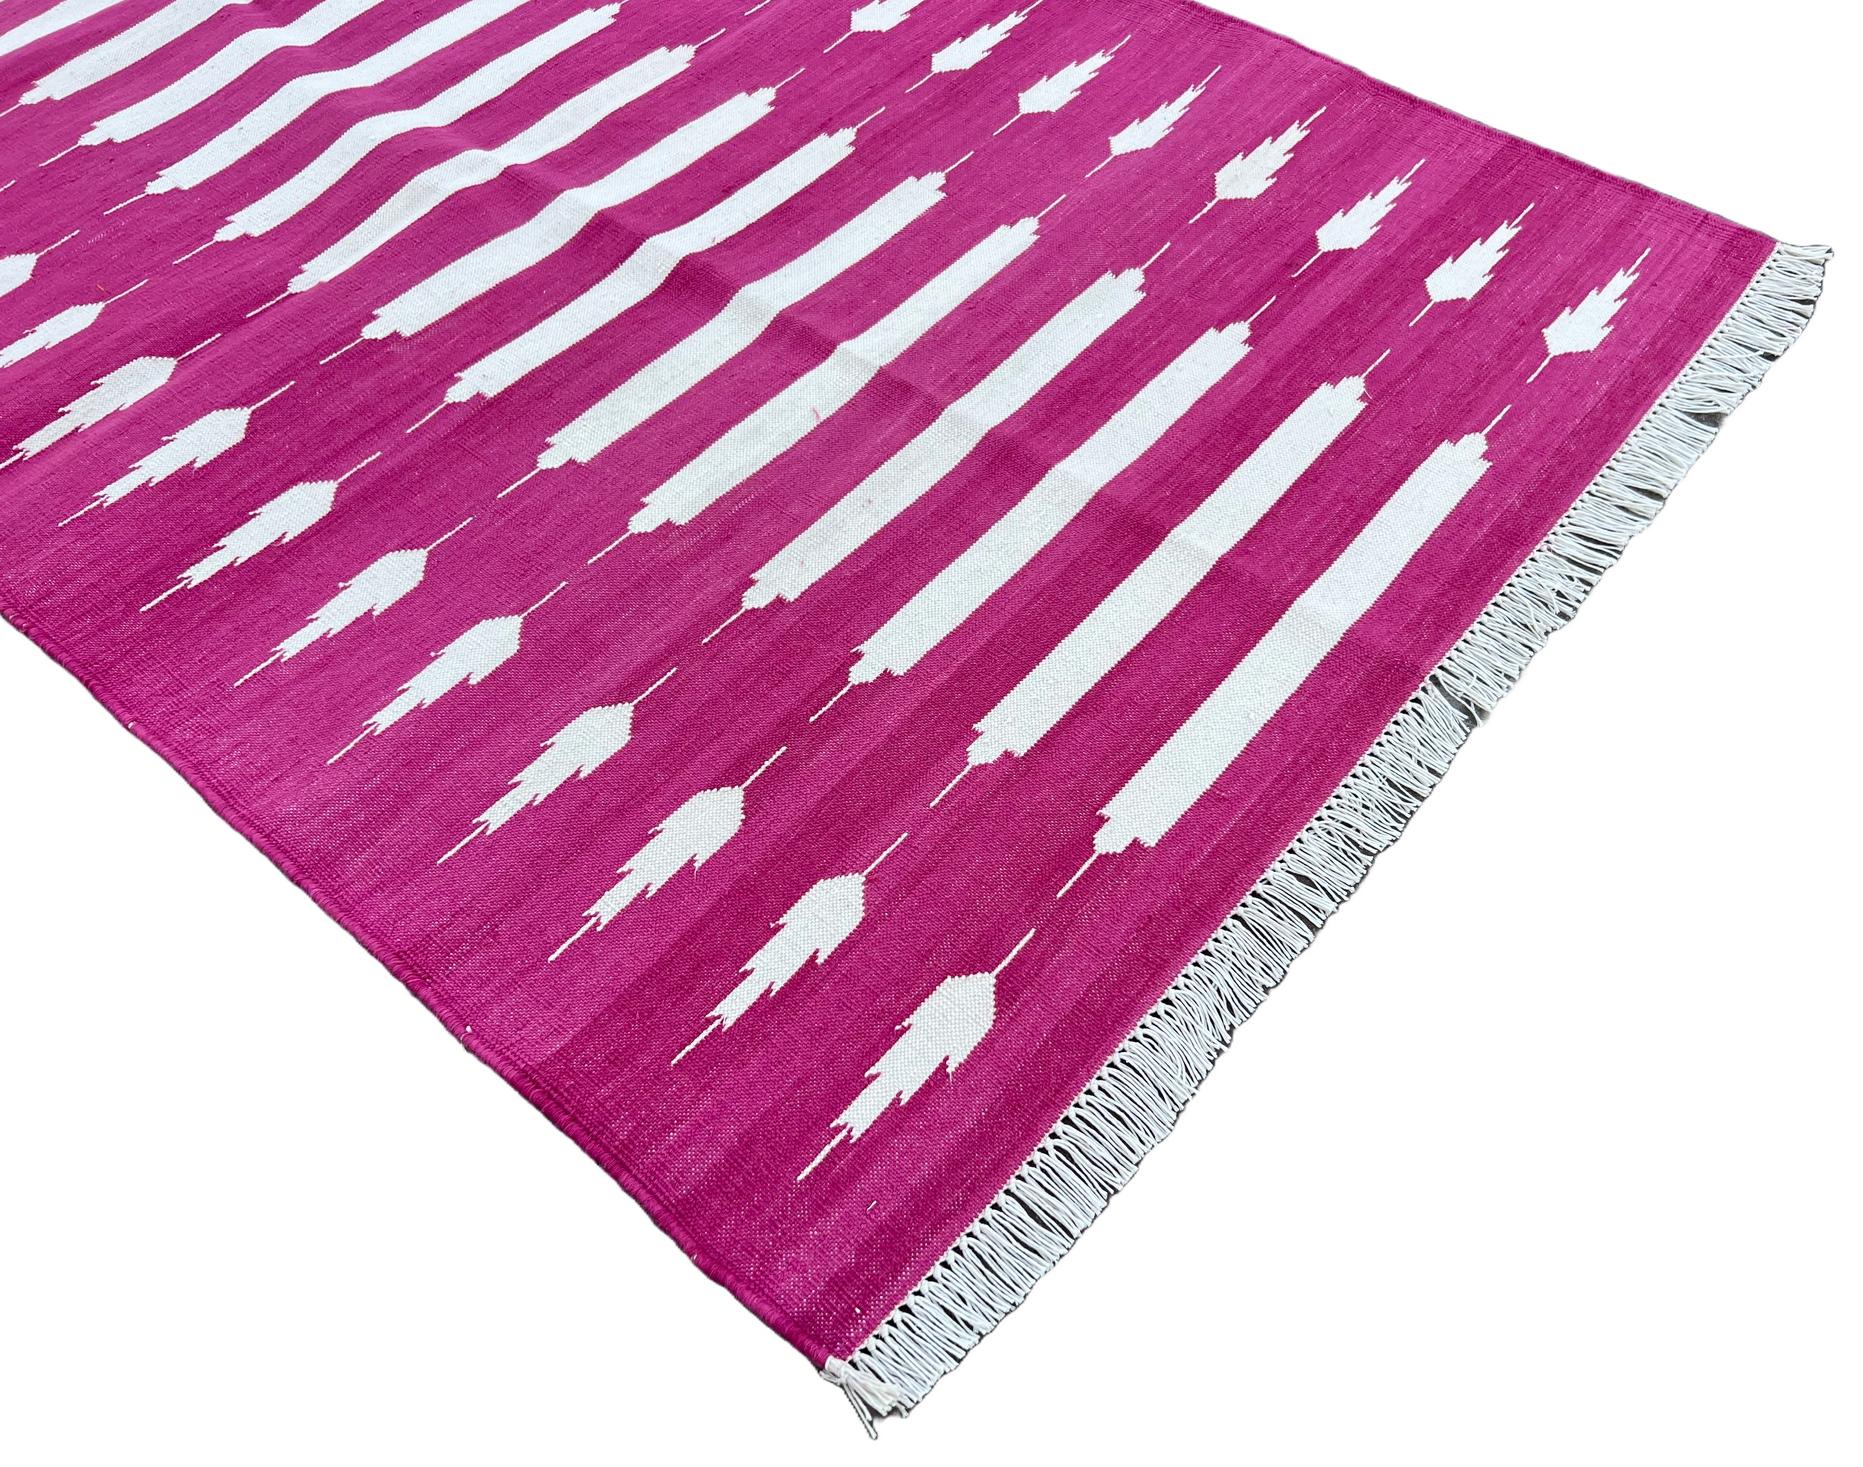 Hand-Woven Handmade Cotton Area Flat Weave Rug, 3x5 Pink And White Striped Indian Dhurrie For Sale